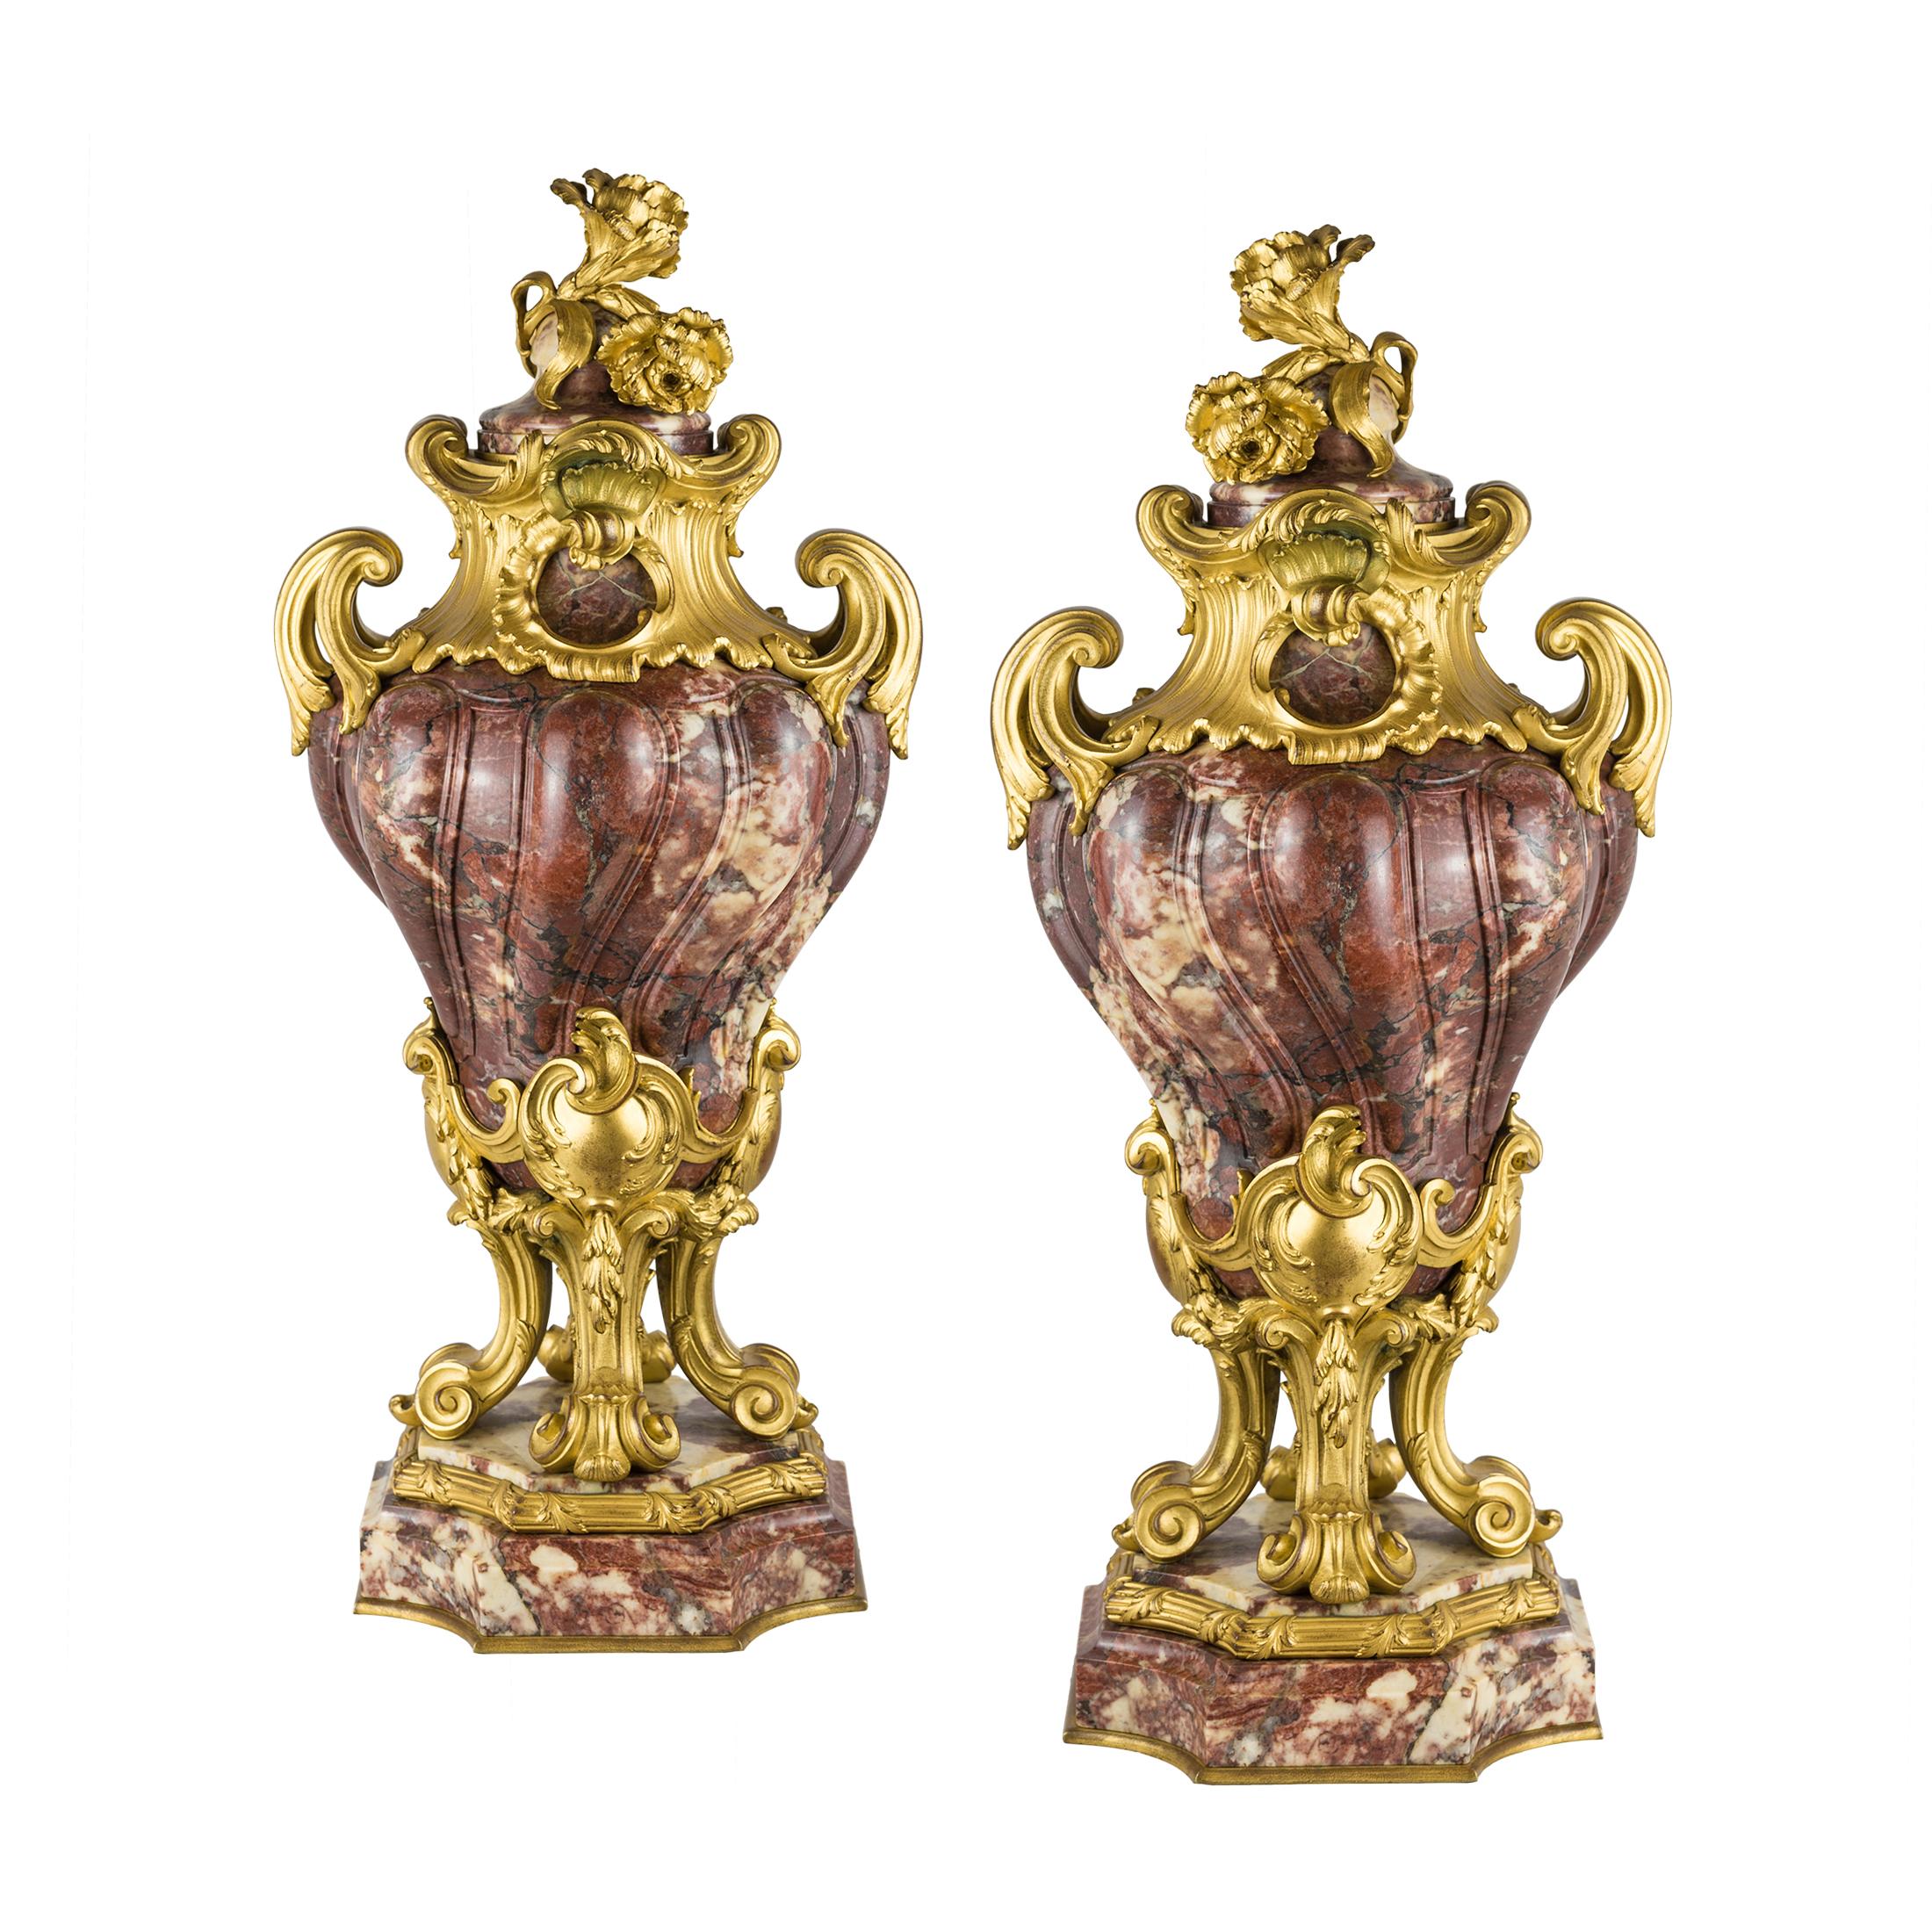 A stunning Pair of Louis XV Style gilt-bronze mounted and fleur de Pêcher Marble Cassolets. The bronze work is highly refined and ornaments are inspired by the Rocaille style, flowers and foliage attributed to François Linke.

Maker: Attributed to